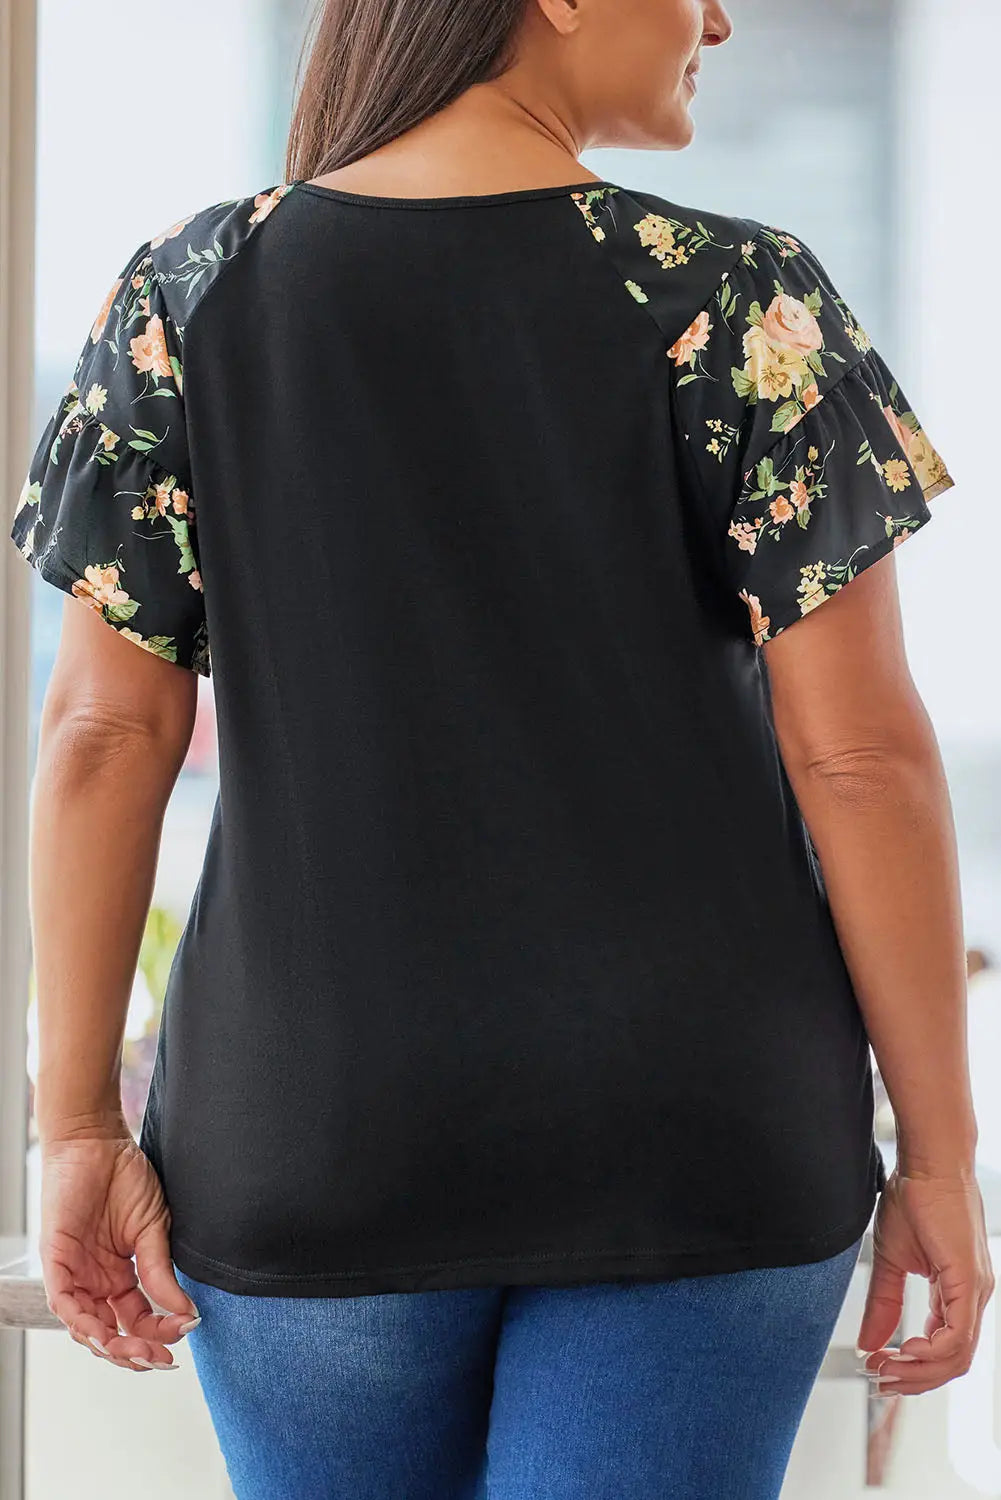 Black floral ruffle sleeve plus size top